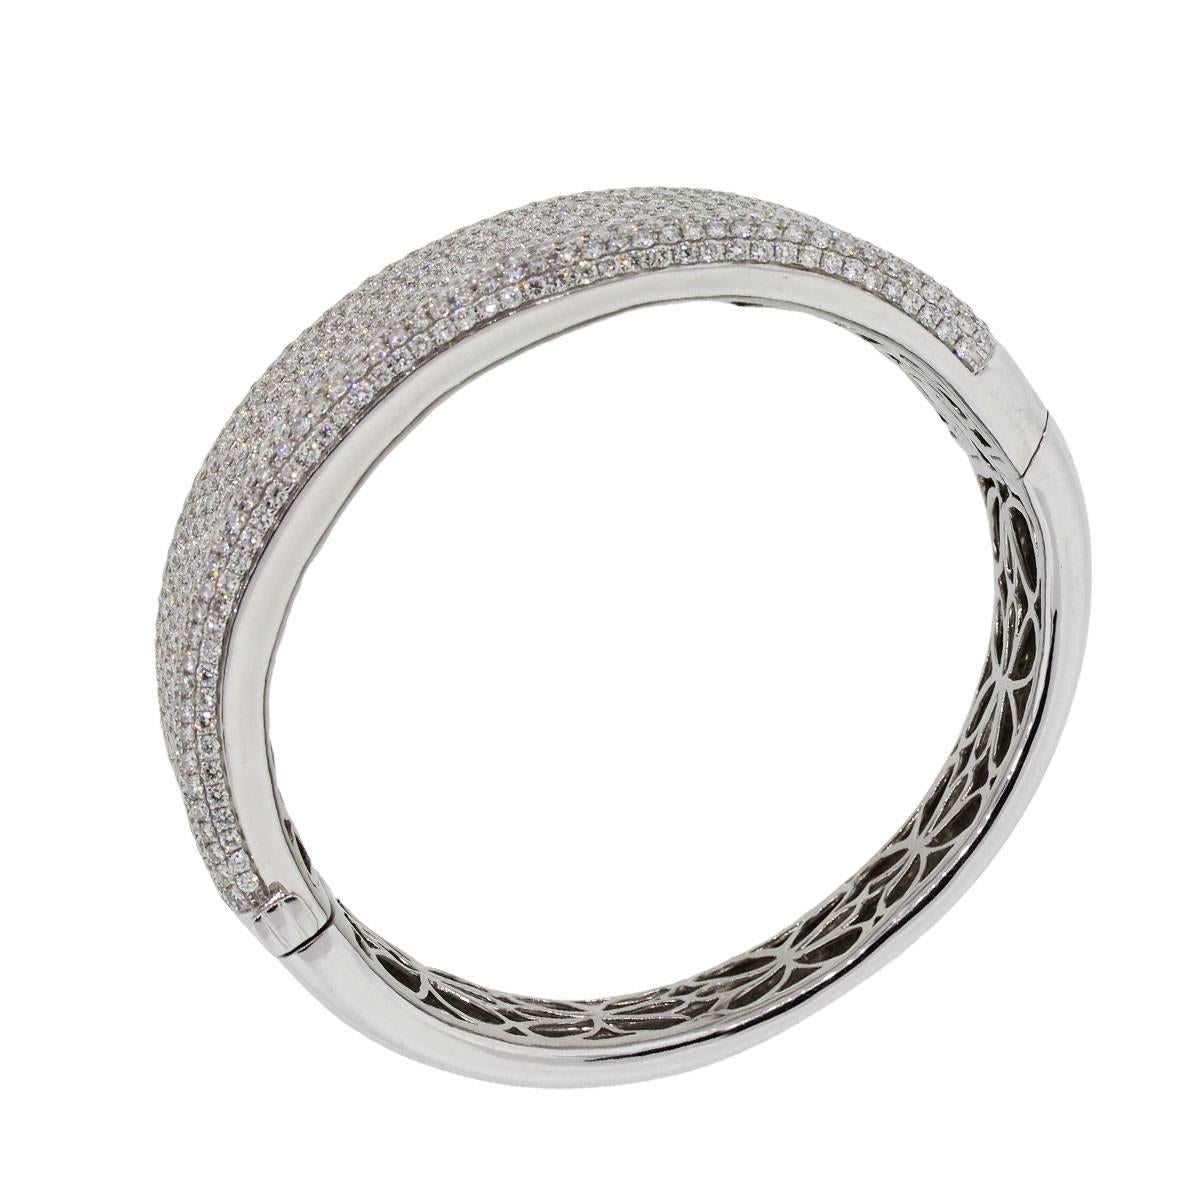 Material: 18k white gold
Diamond Details: Approximately 17.57ctw of round brilliant diamonds. Diamonds are G/H in color and VS in clarity
Clasp: Hinged clasp
Total Weight: 79.6g (51.1dwt)
Measurements: Will fit a 7″ wrist. Bracelet is 1.12″ in